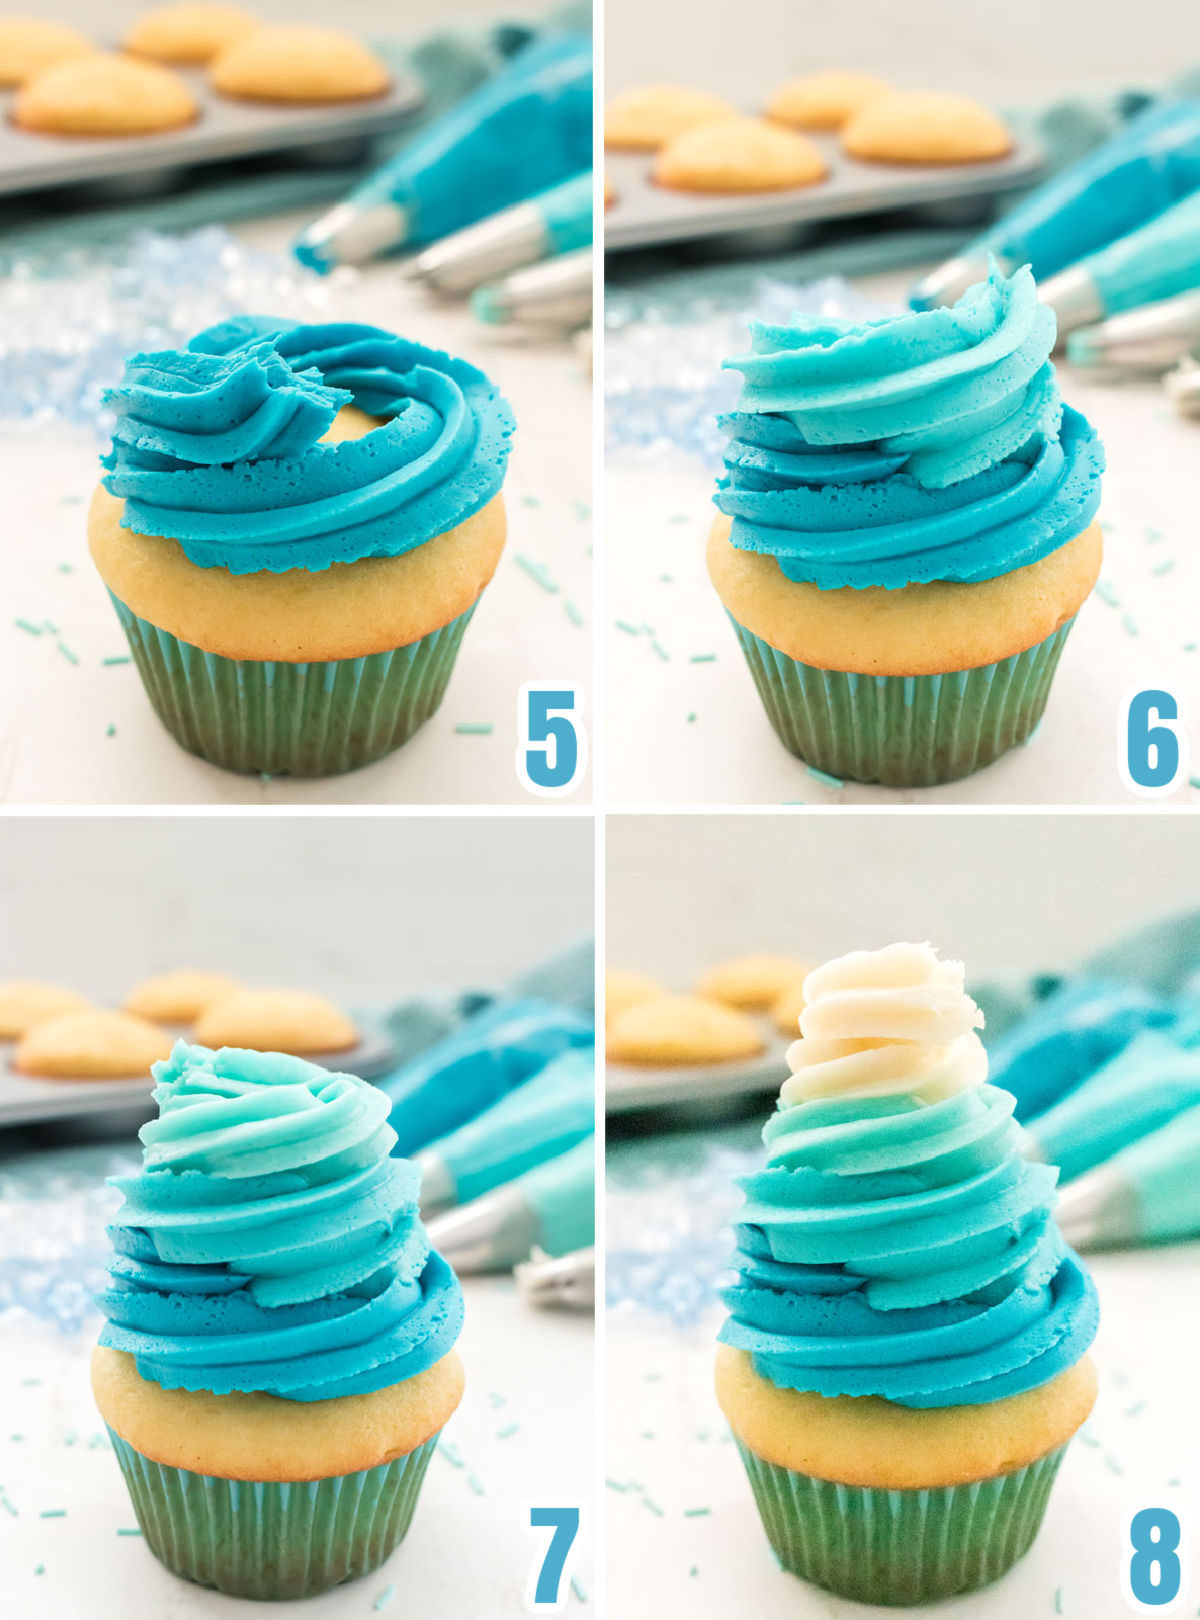 Collage image showing the steps for creating the ombre swirl effect for the Frozen Birthday Party Cupcakes.